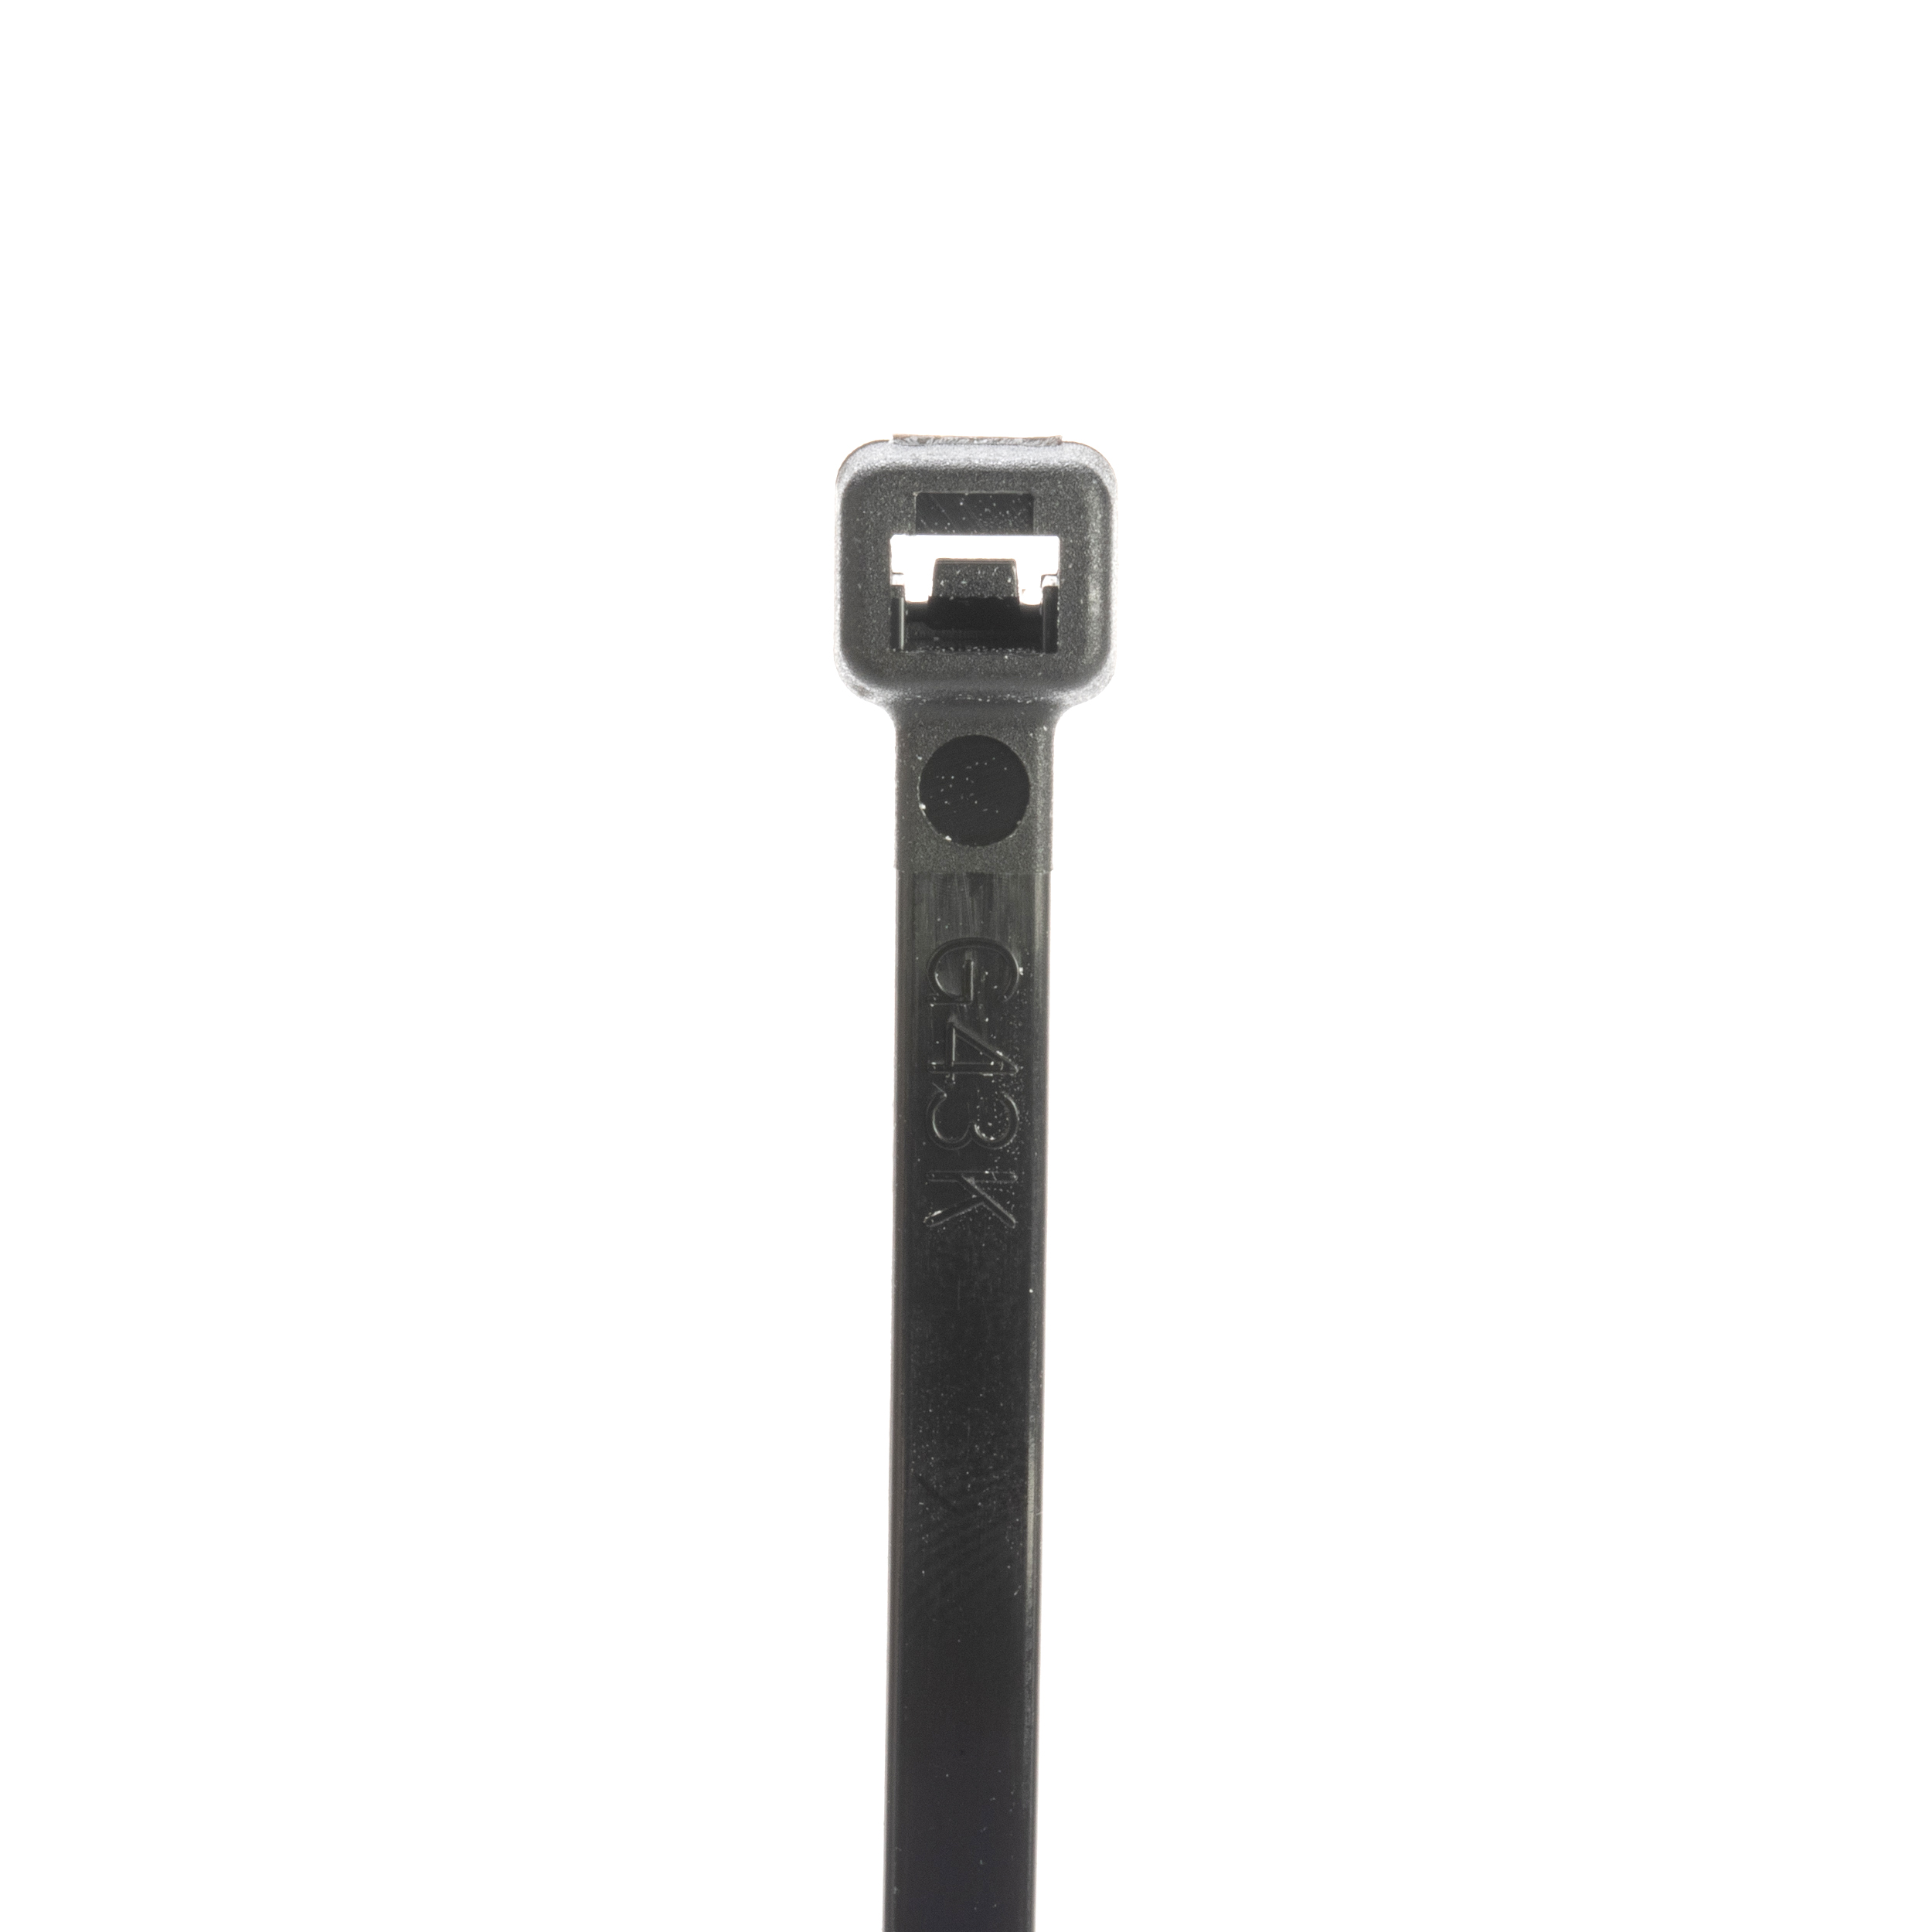 PAN S15-50-C0 14.57" CABLE TIE 50TS BLACK